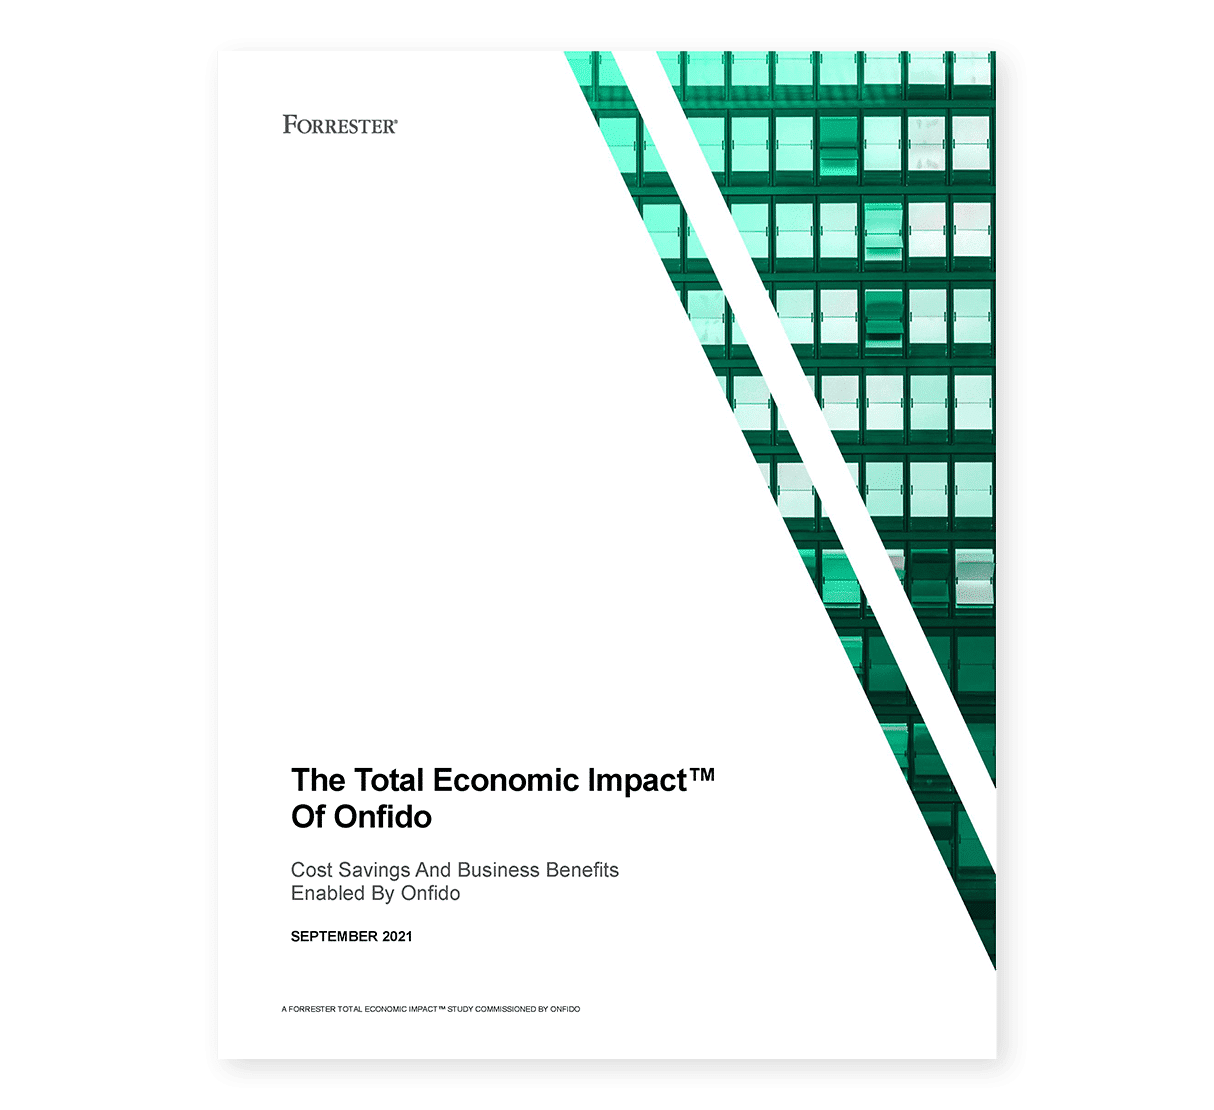 Cover of The Total Economic Impact of Onfido report